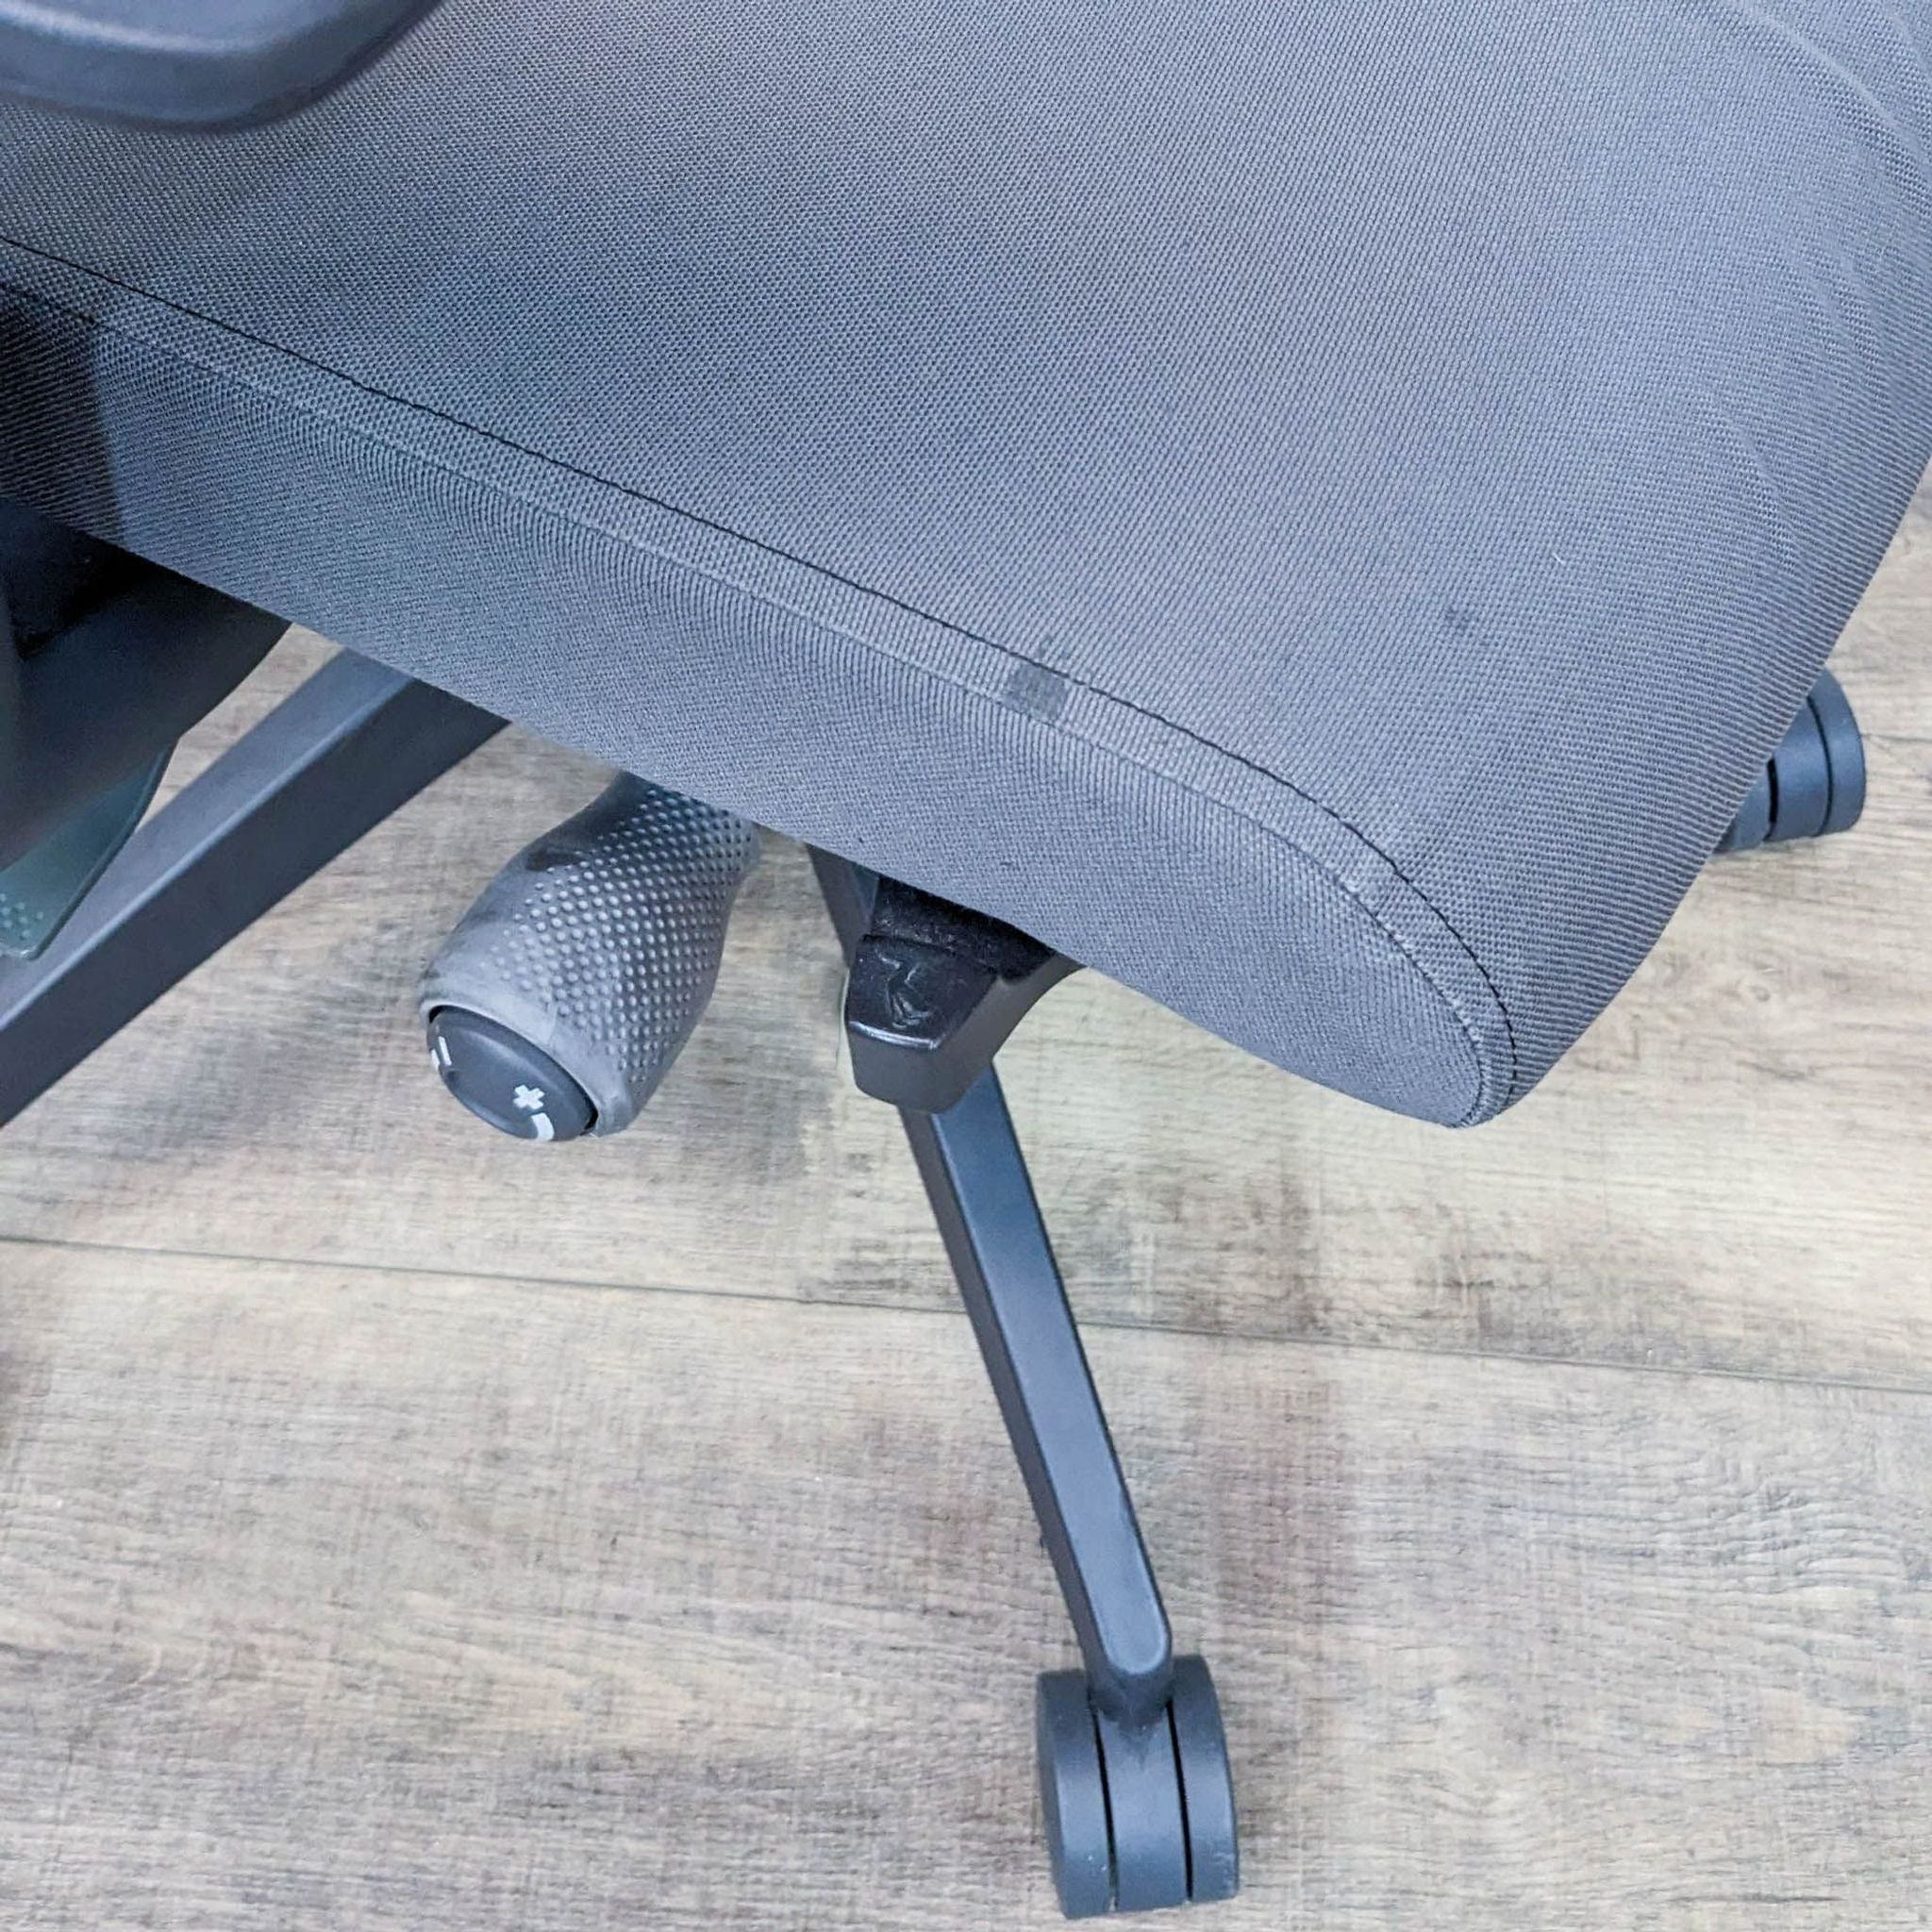 Close-up of a Torsa Engineering high-back office chair by SitOnIt, focusing on the mesh fabric seat and nylon base with casters.